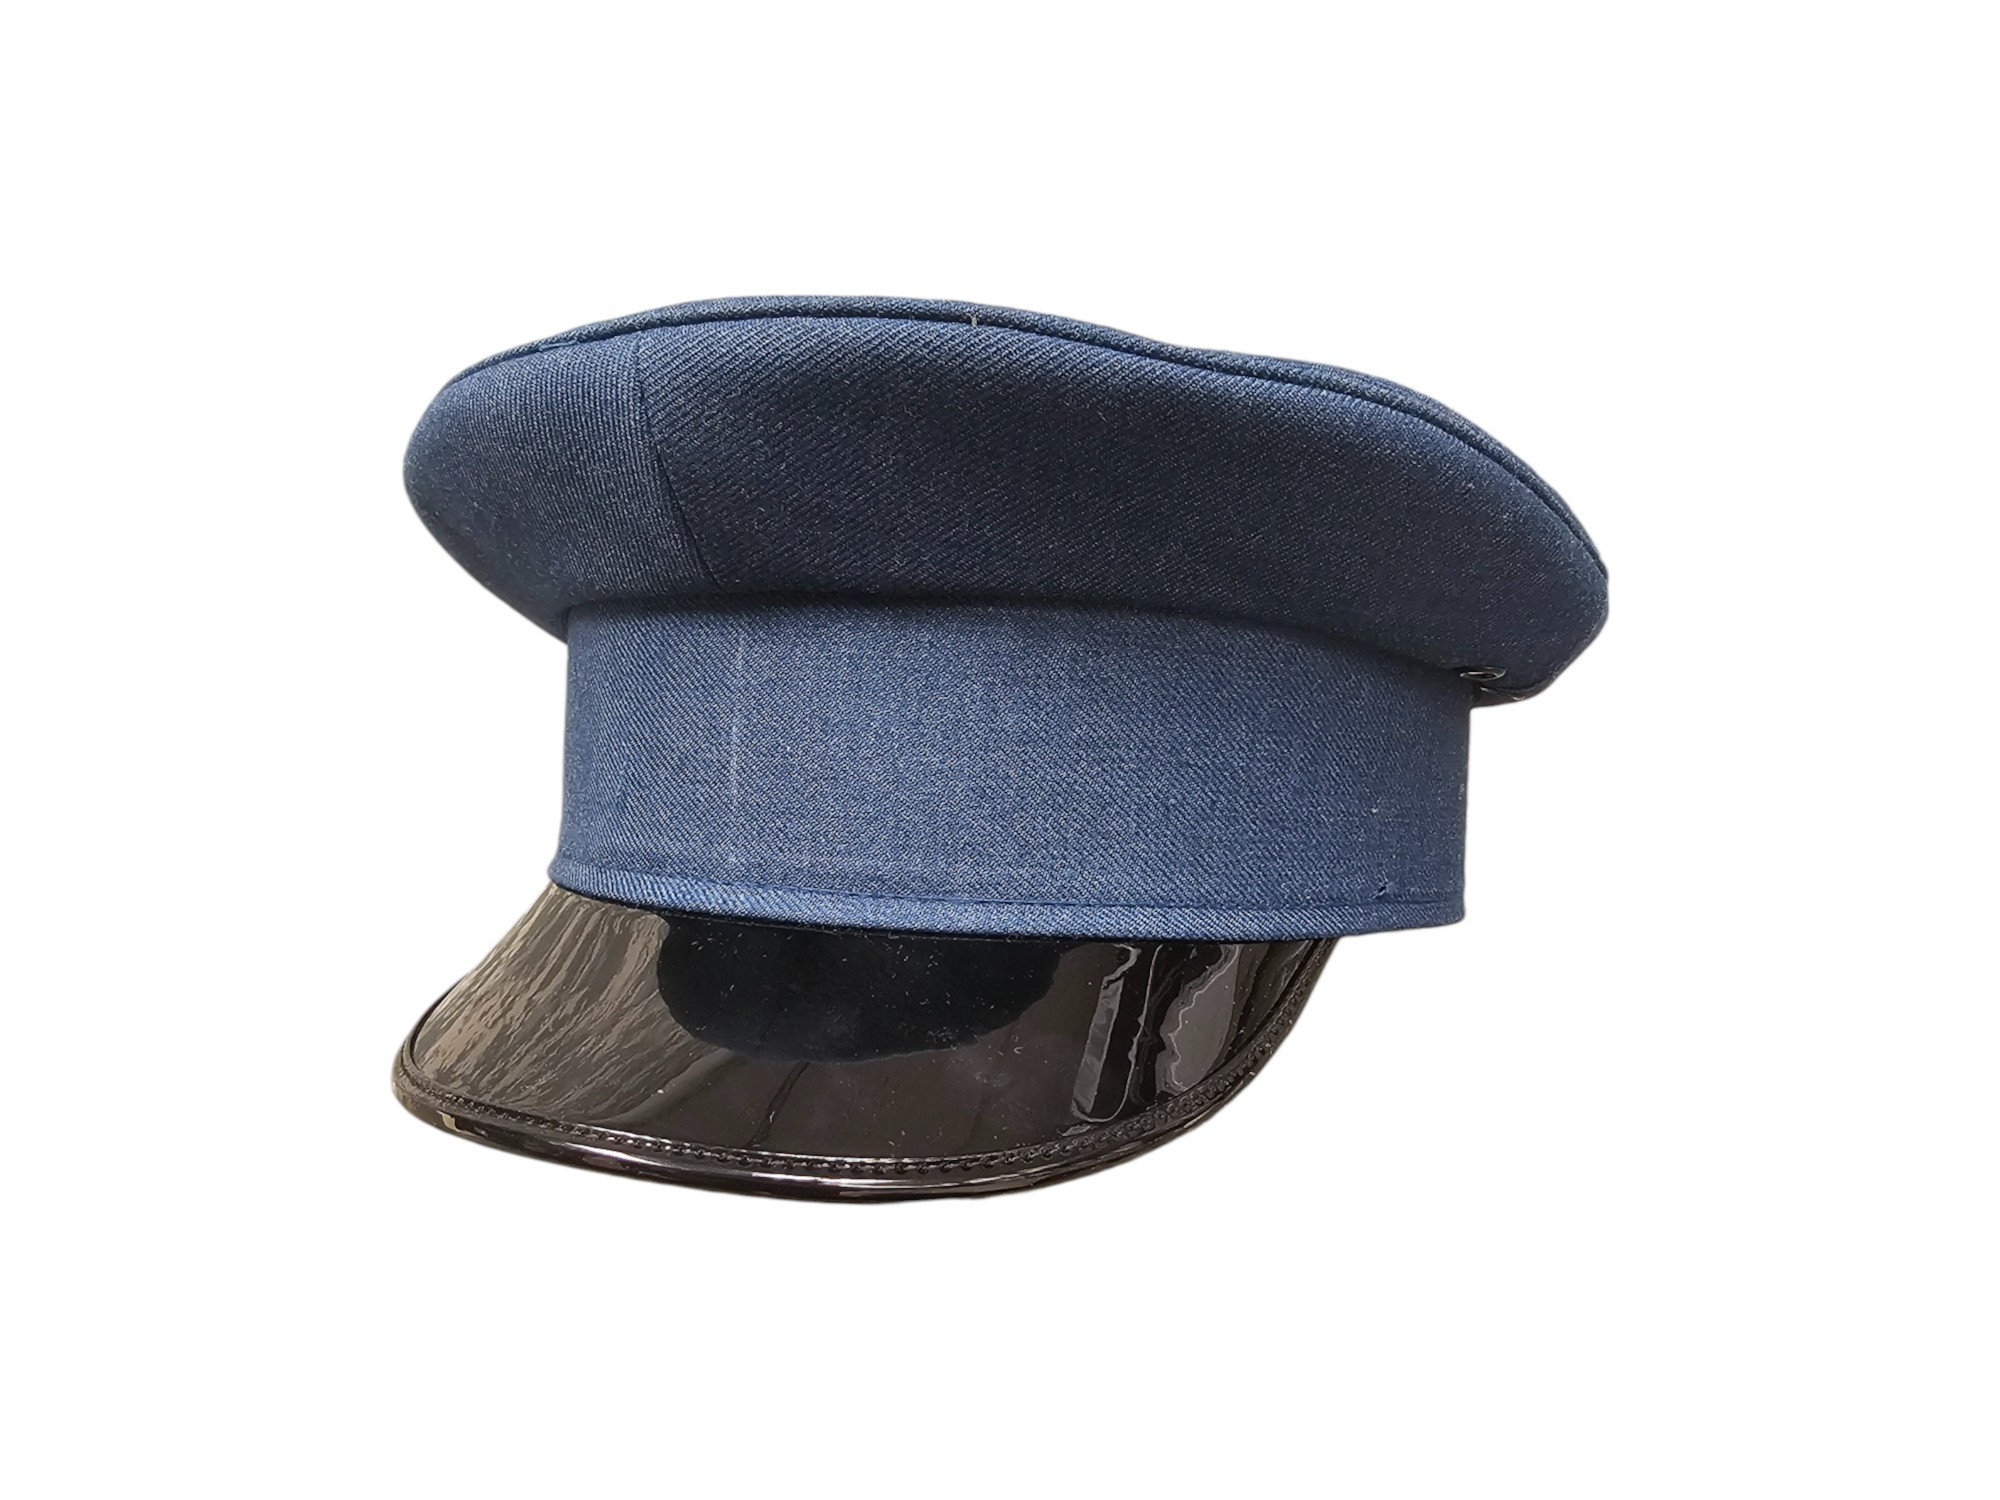 Canadian Armed Forces, Air Force Service Dress Cap